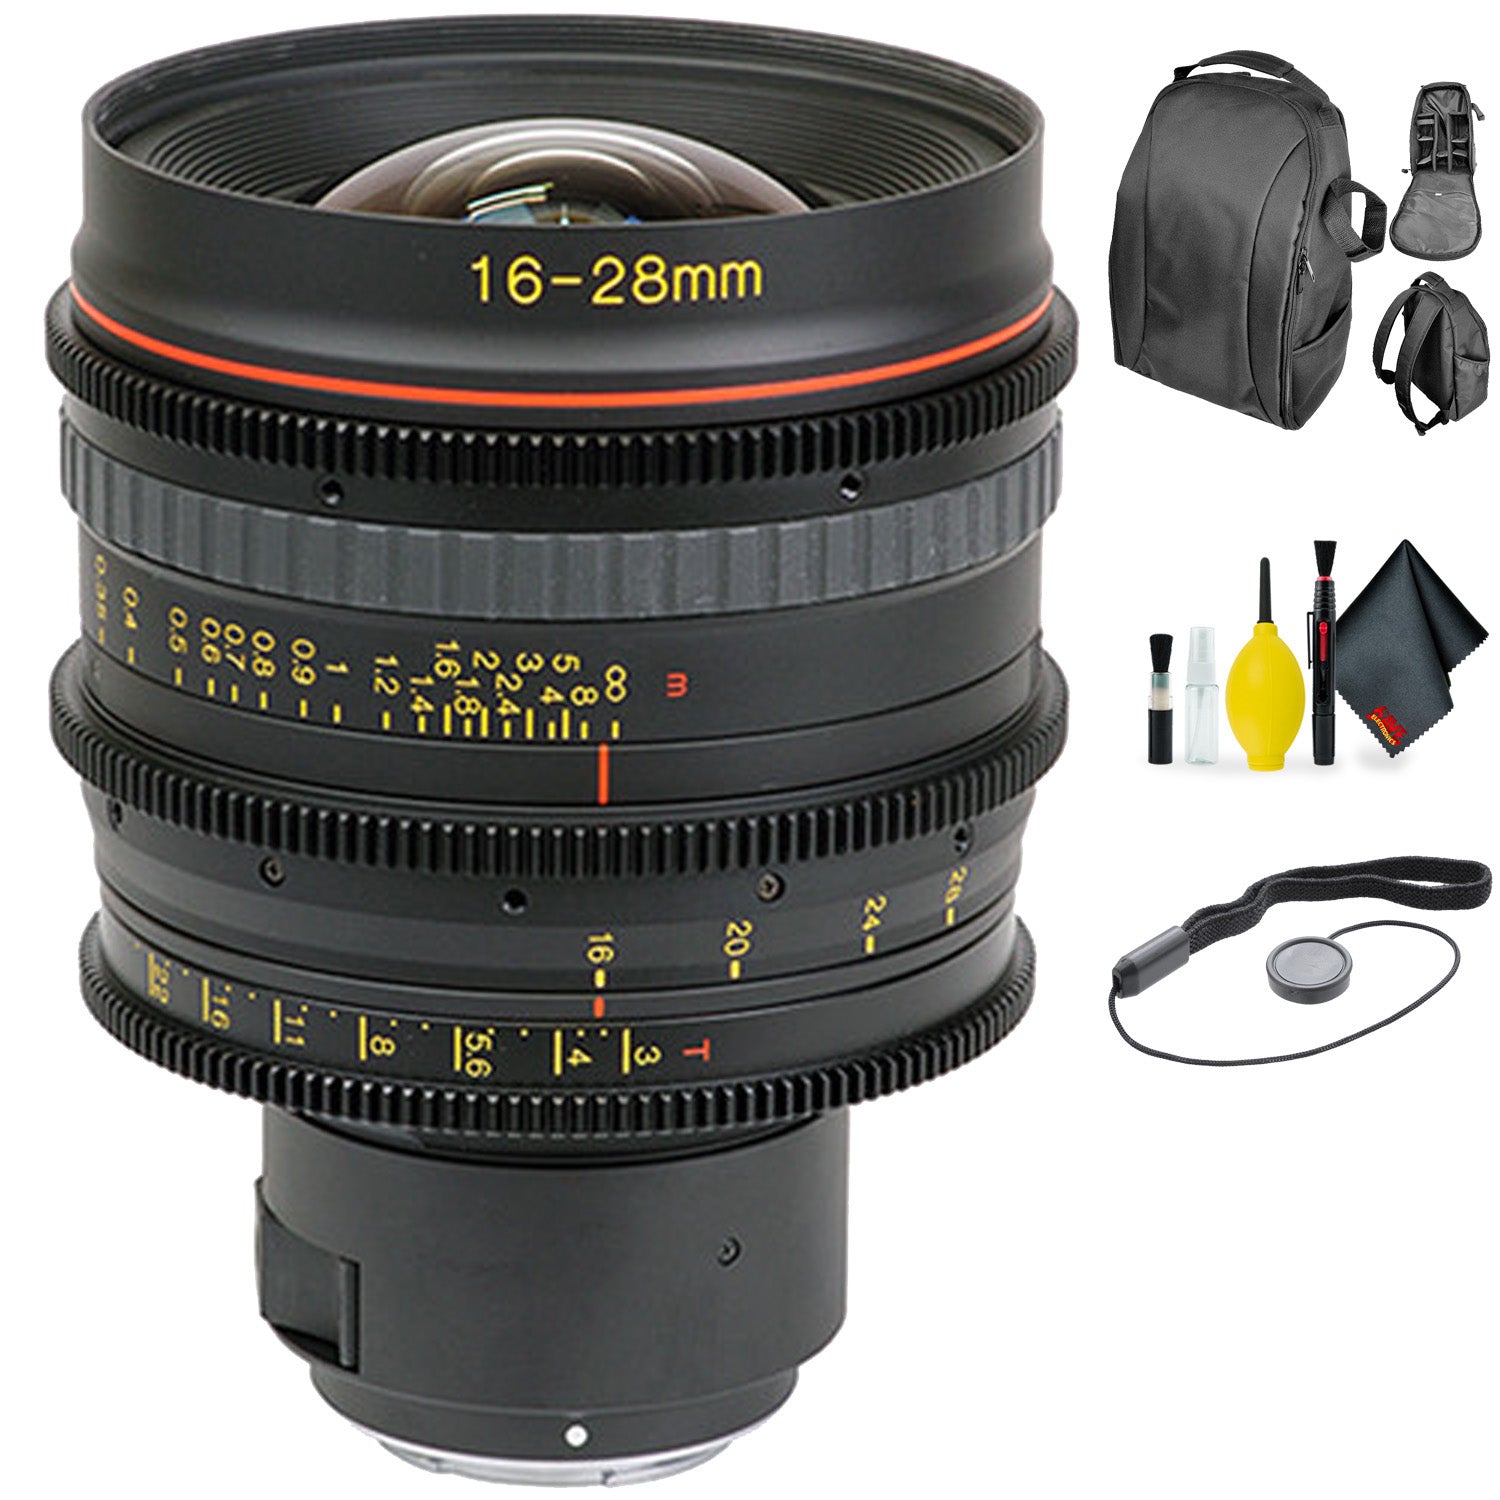 Tokina Cinema 16-28mm T3.0 with Sony-E Mount + Deluxe Lens Cleaning Kit Bundle